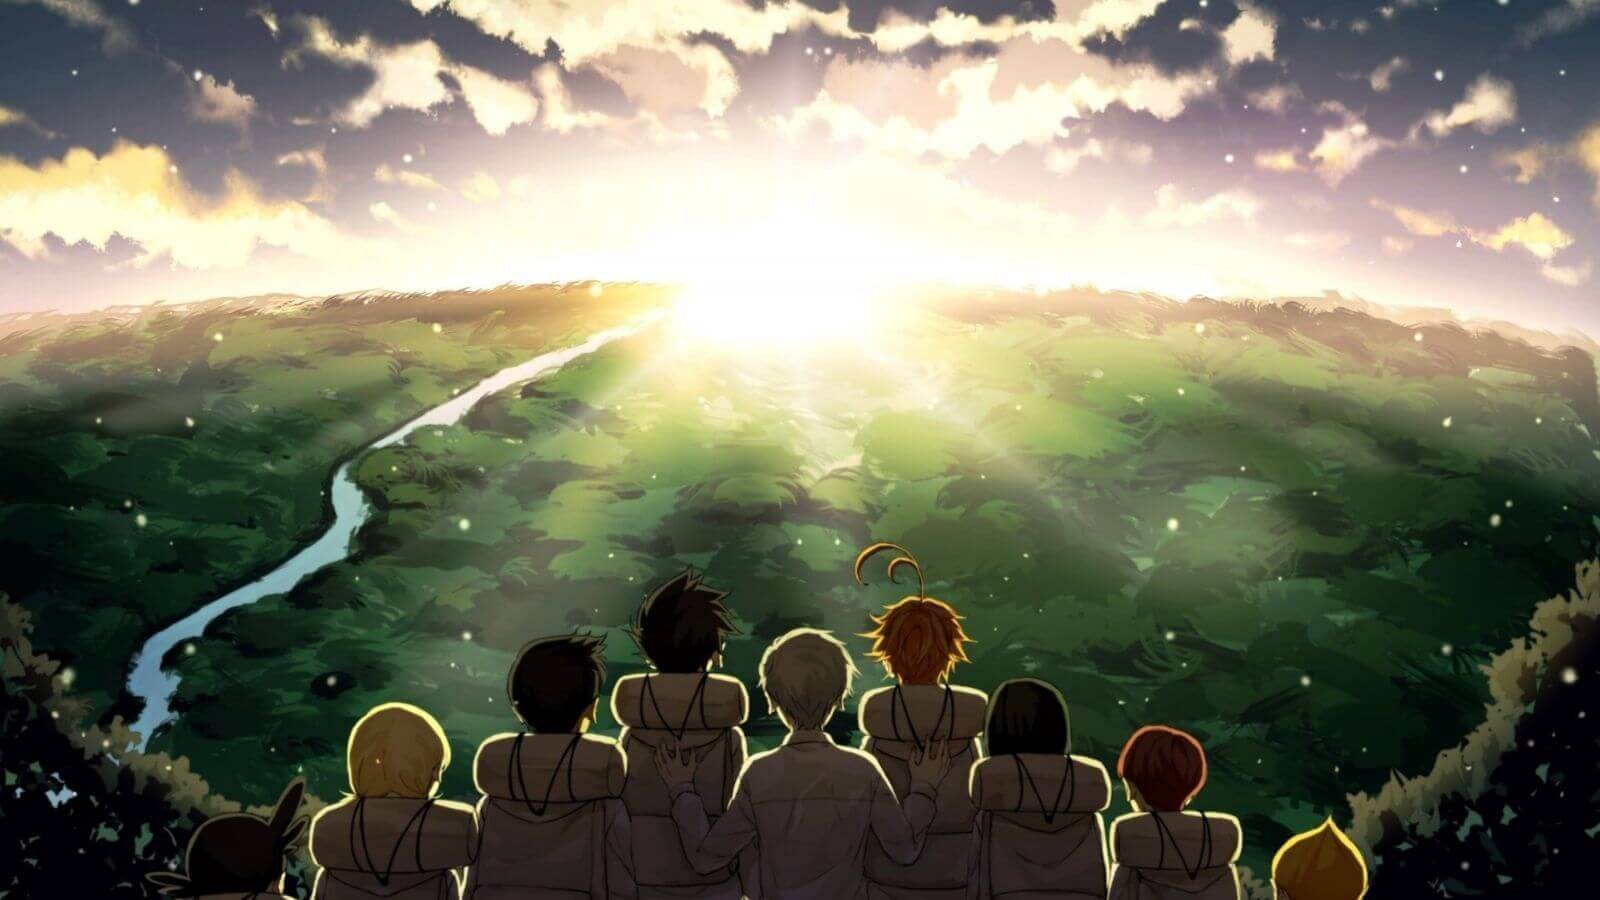 The Promised Neverland Season 2 Episode 2 Release Date And Plot